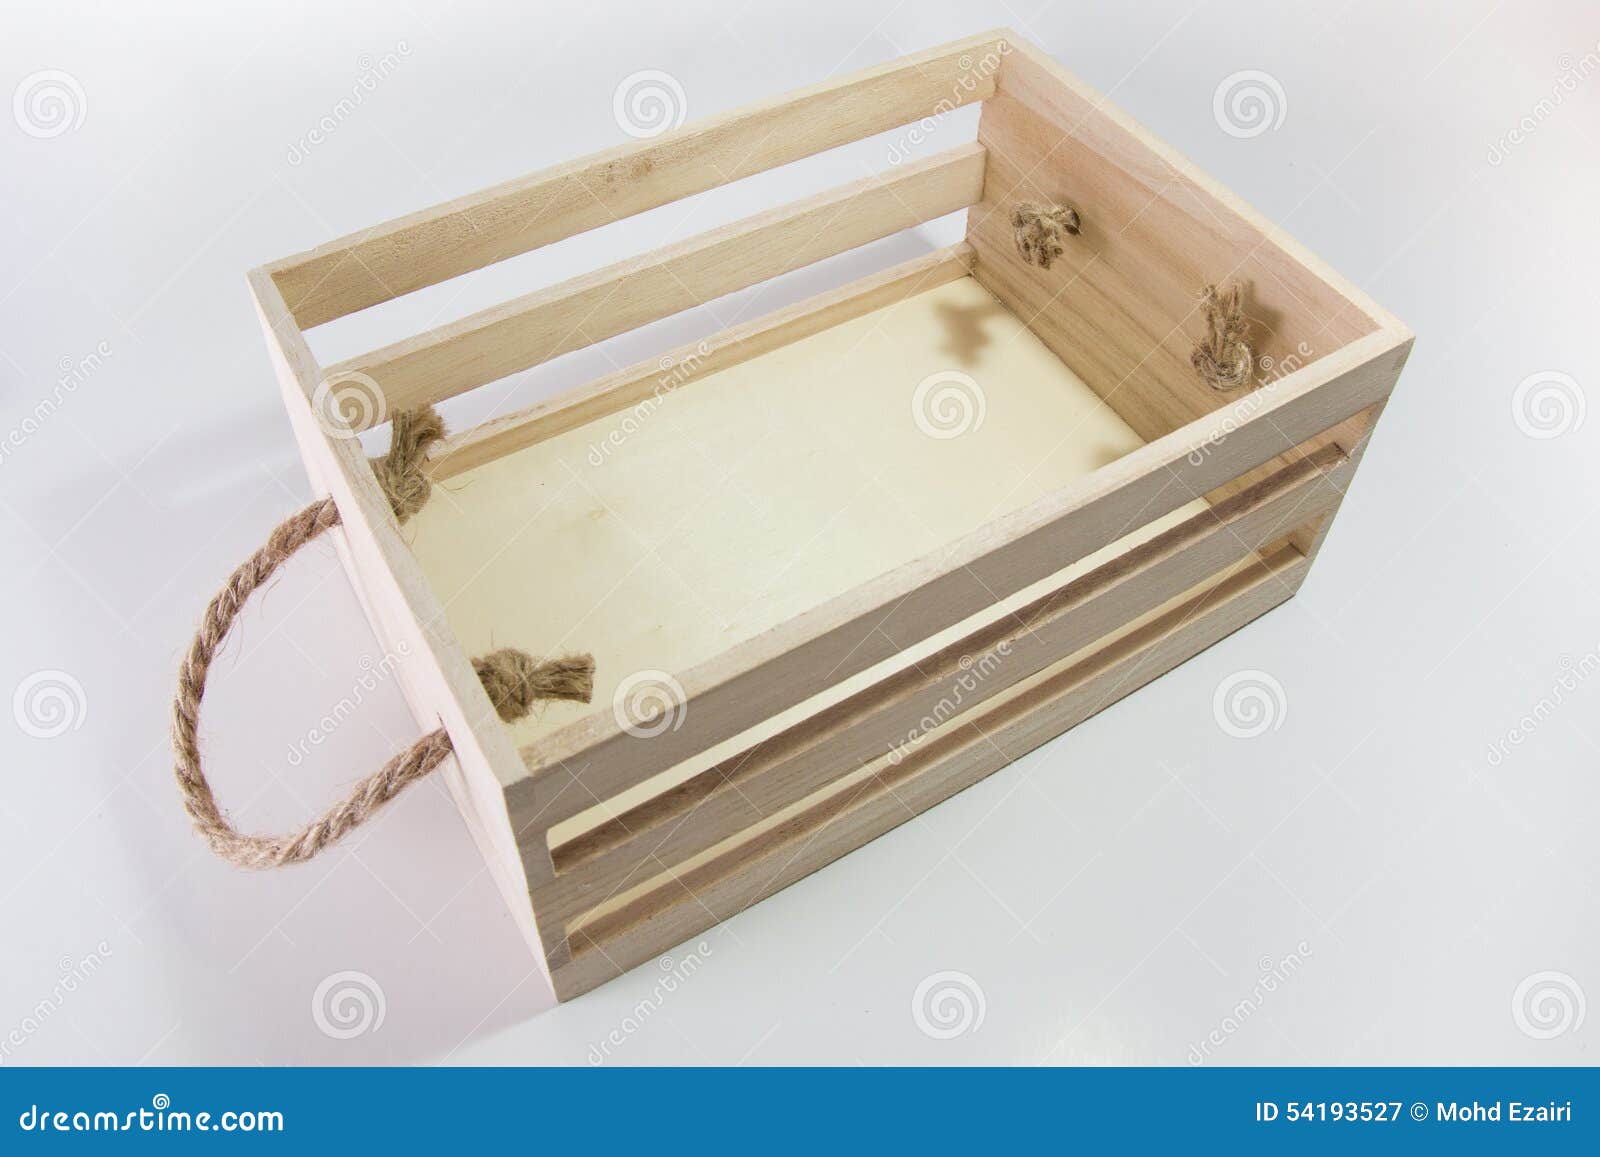 Wooden Box with Rope Handle Stock Image - Image of handle, empty